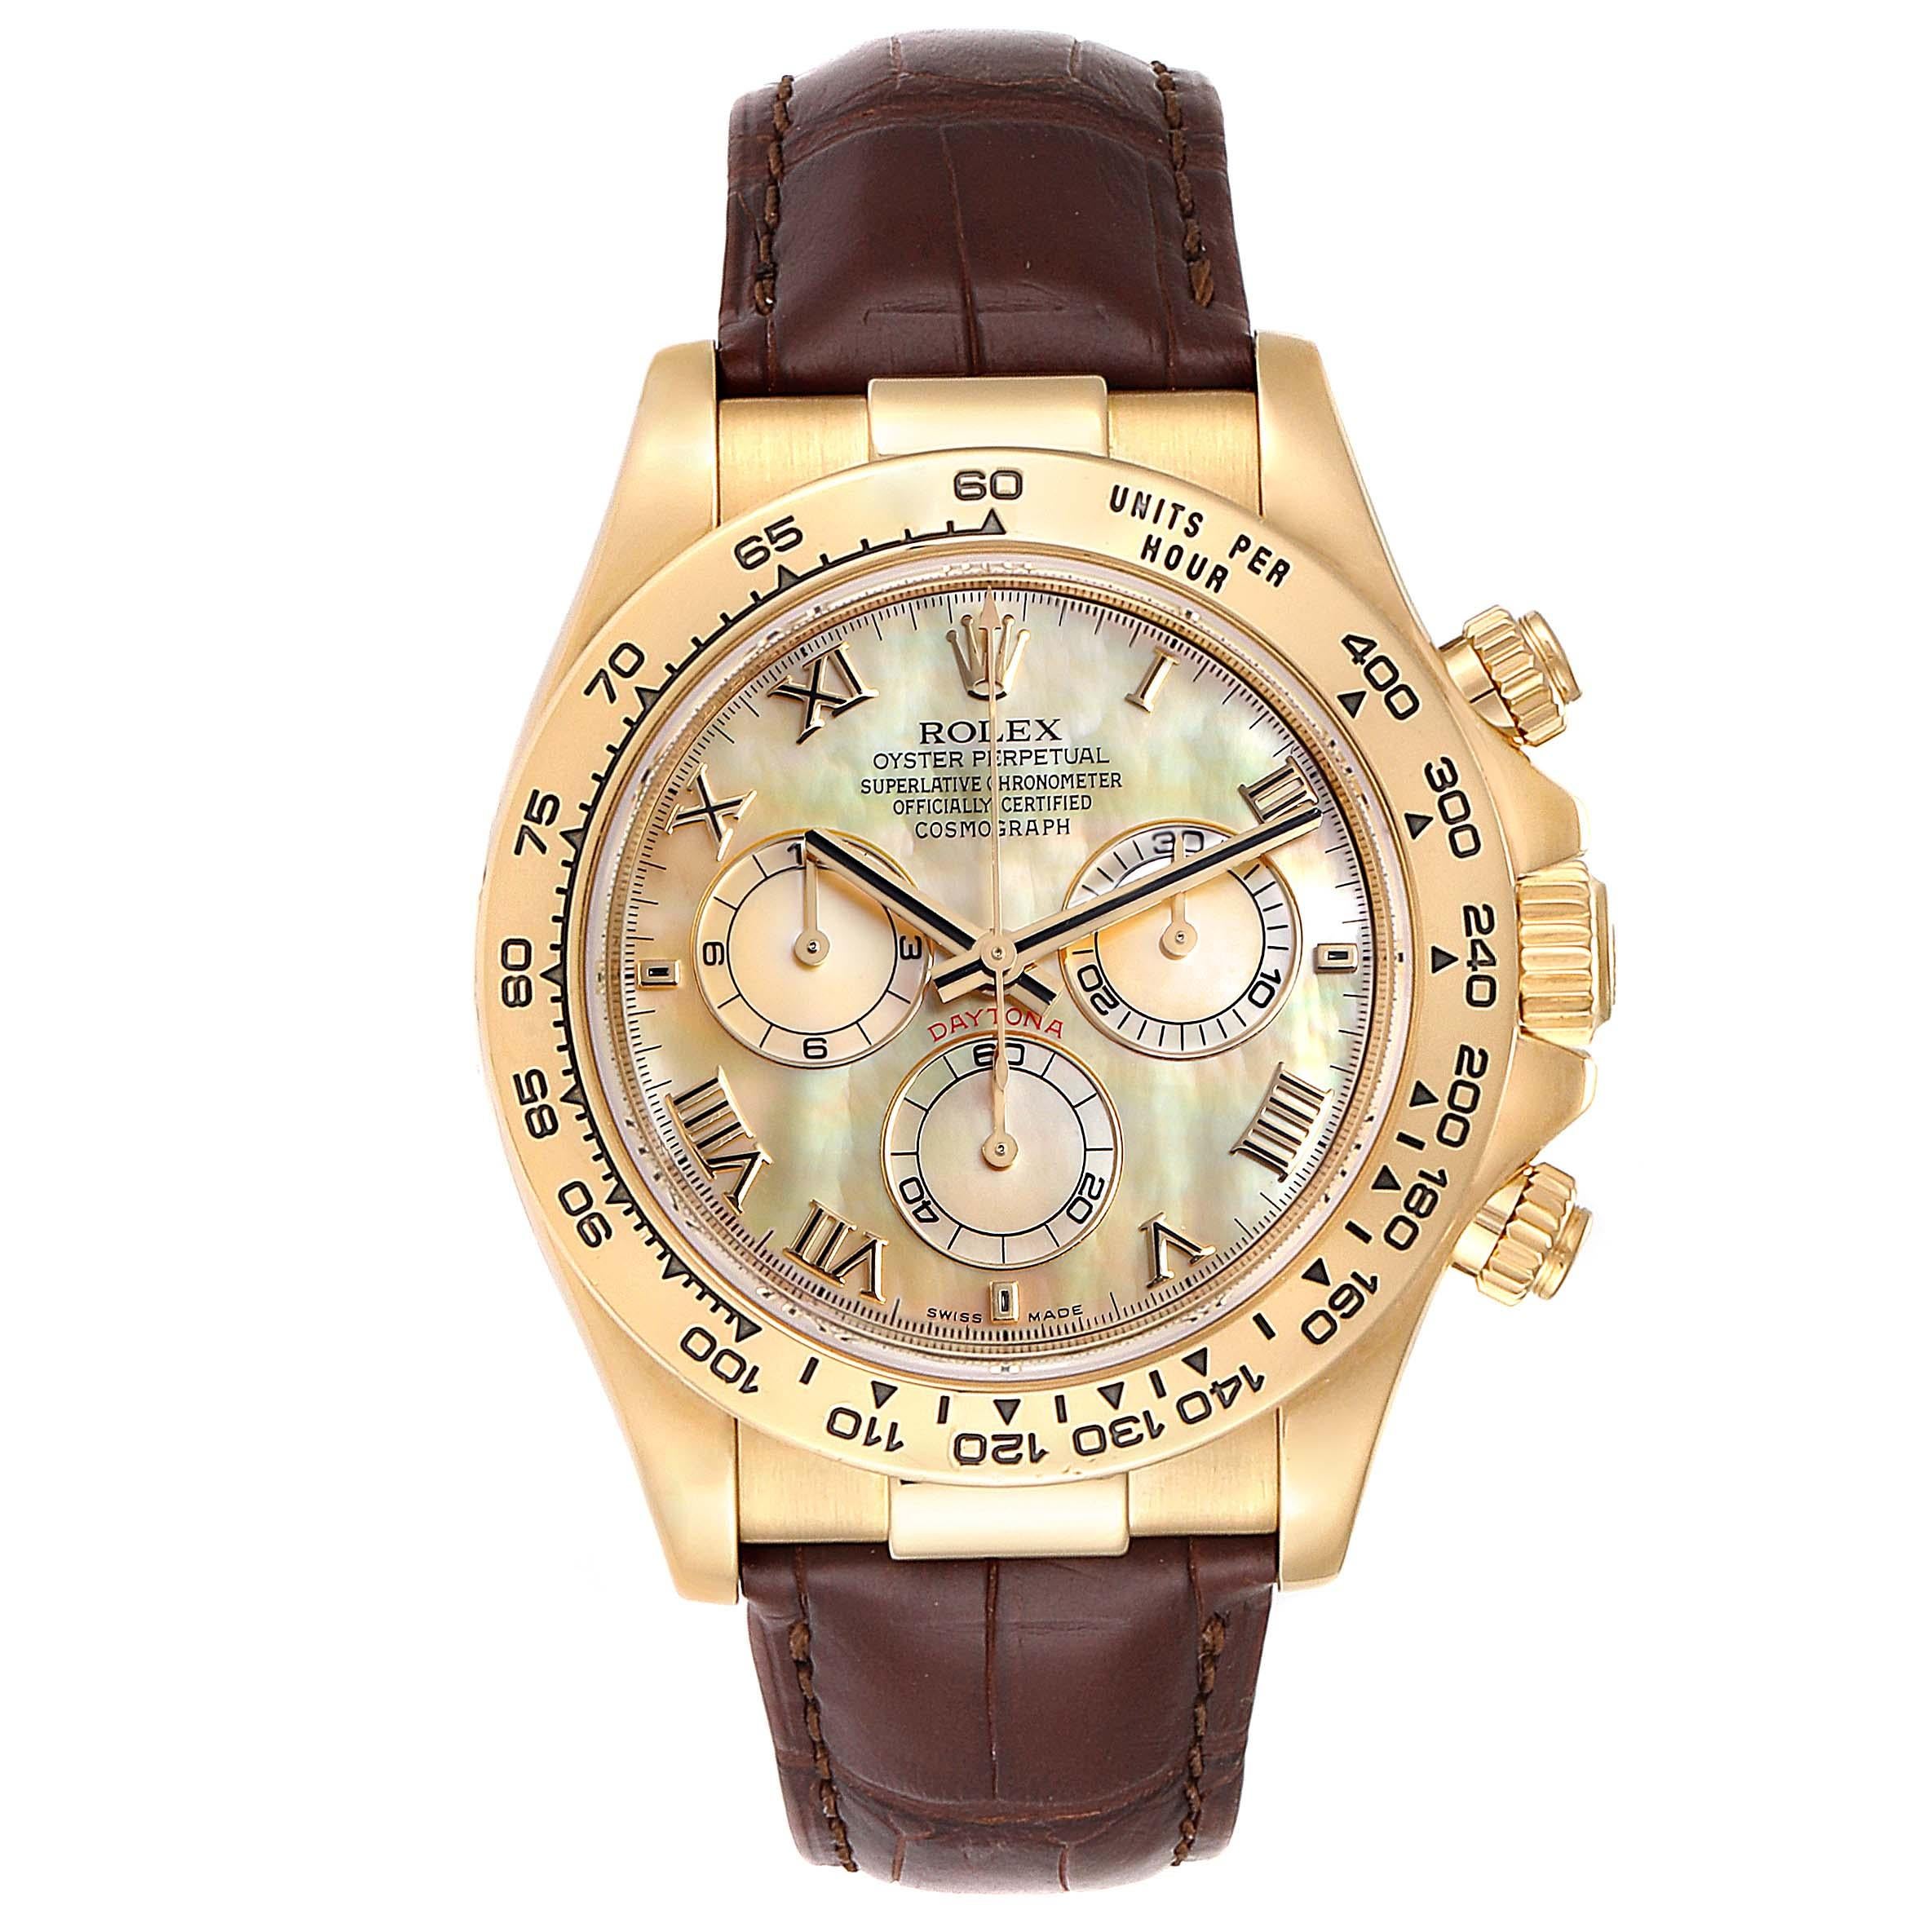 Rolex Daytona Yellow Gold Mother of Pearl Dial Mens Watch 116518. Officially certified chronometer automatic self-winding movement. Chronograph function. 18K yellow gold case 40.0 mm in diameter. Special screw-down push buttons. 18K yellow gold